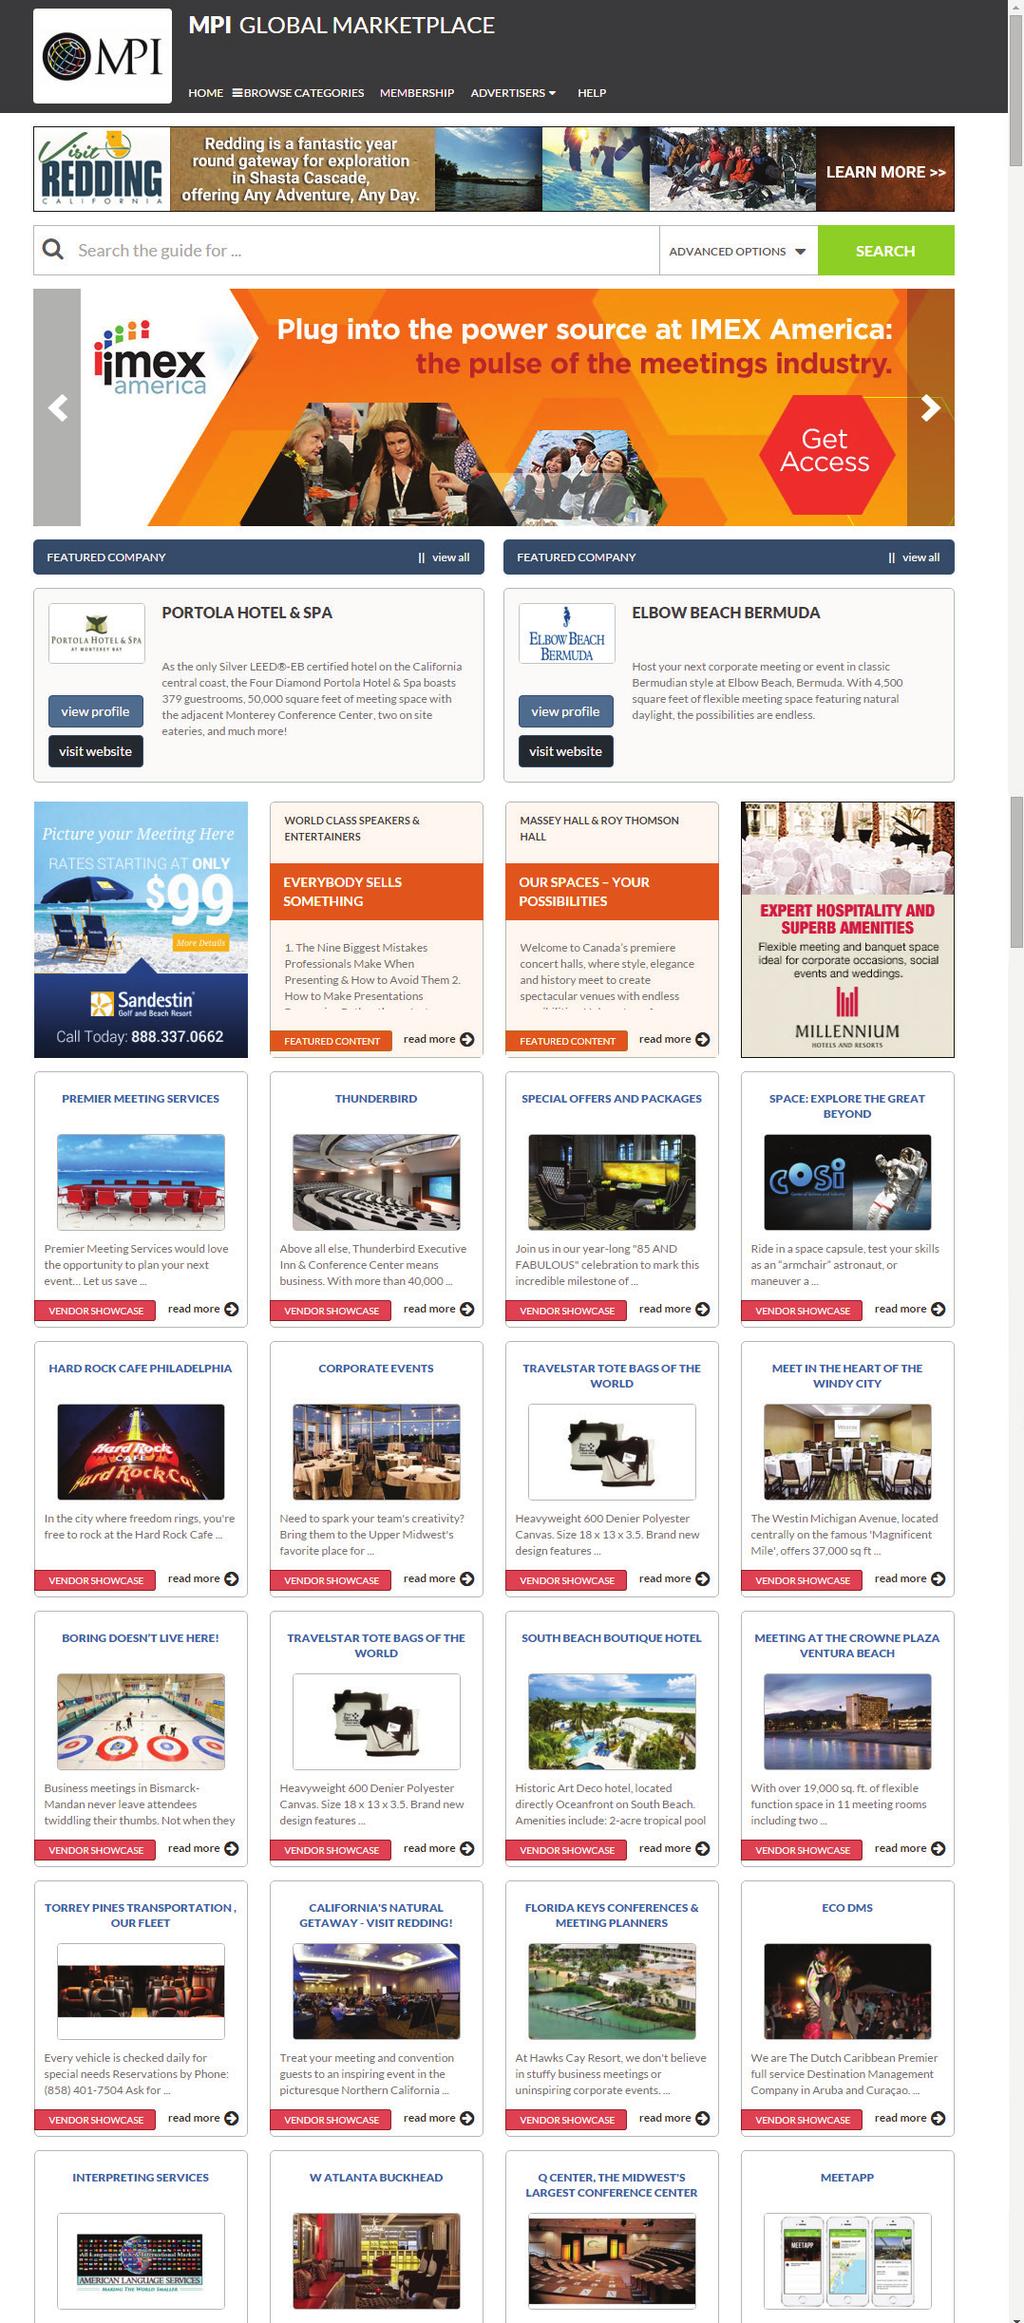 Connected Connected The A MultiView Reflects Your Brand and Authority Your look-and-feel is the foundation of the guide's appearance. Users will instantly identify the buyers guide as your product.